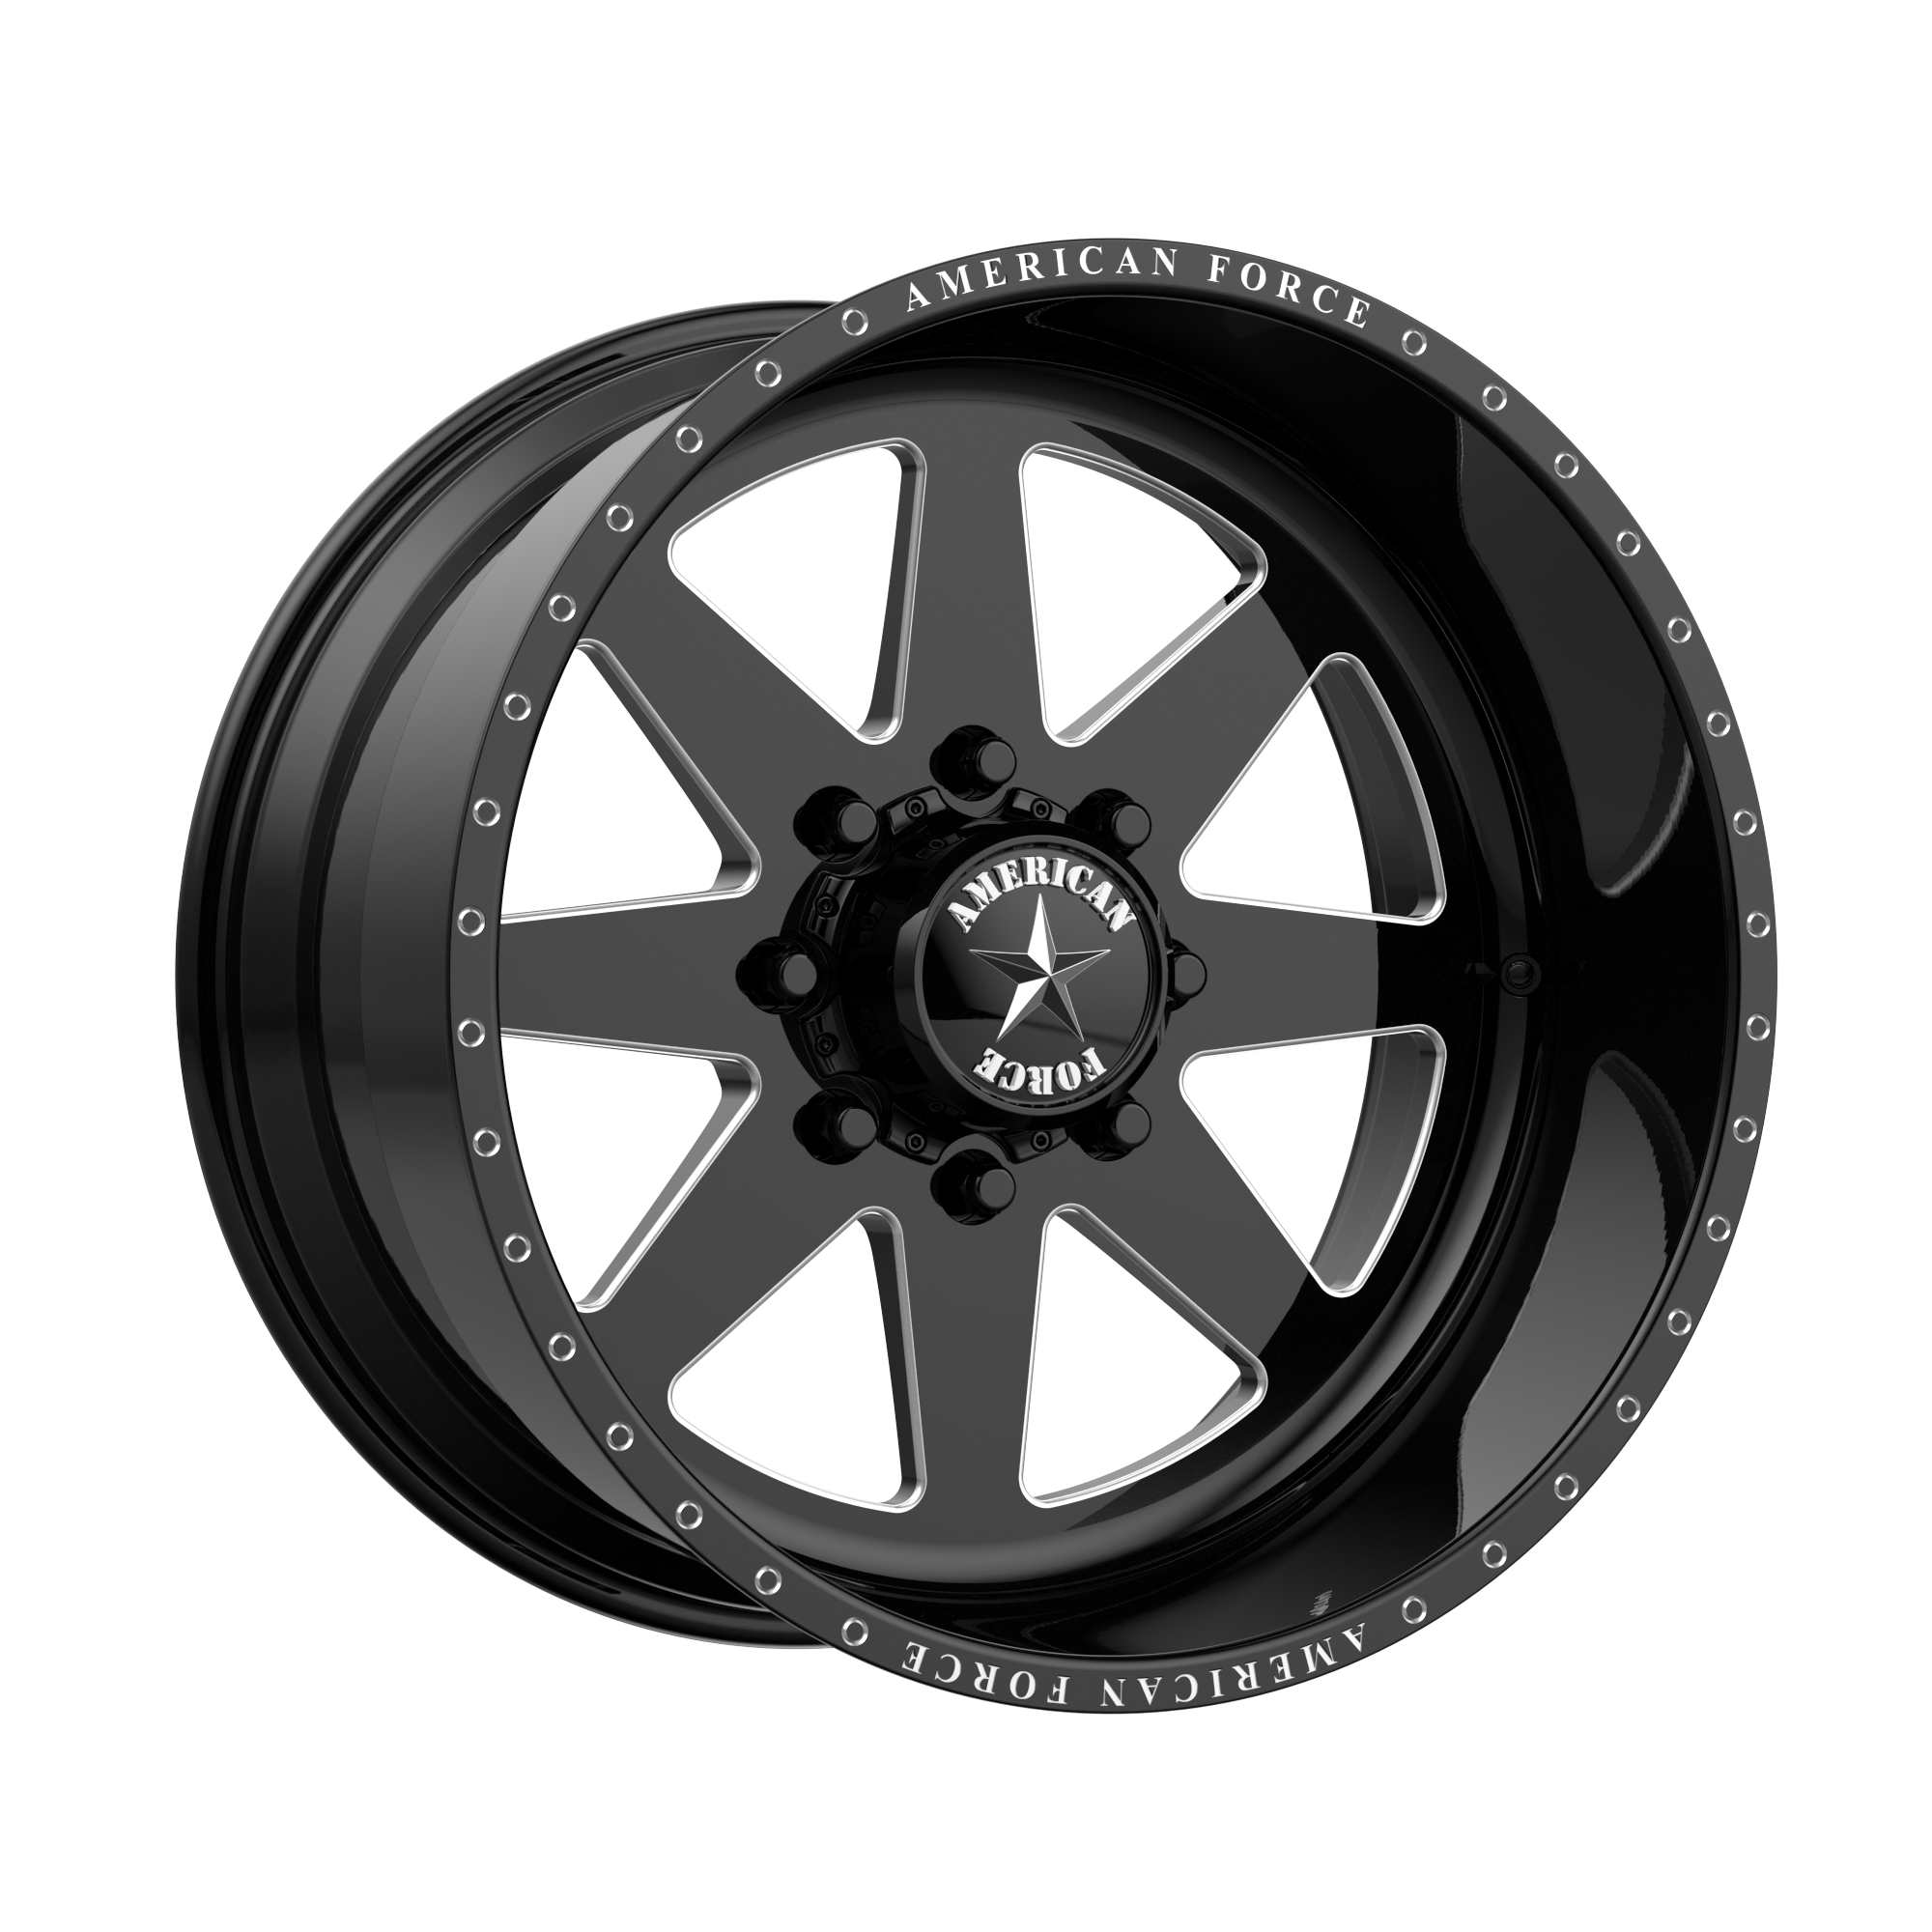 INDEPENDENCE SS 26x16 8x180.00 GLOSS BLACK MACHINED (-101 mm) - Tires and Engine Performance